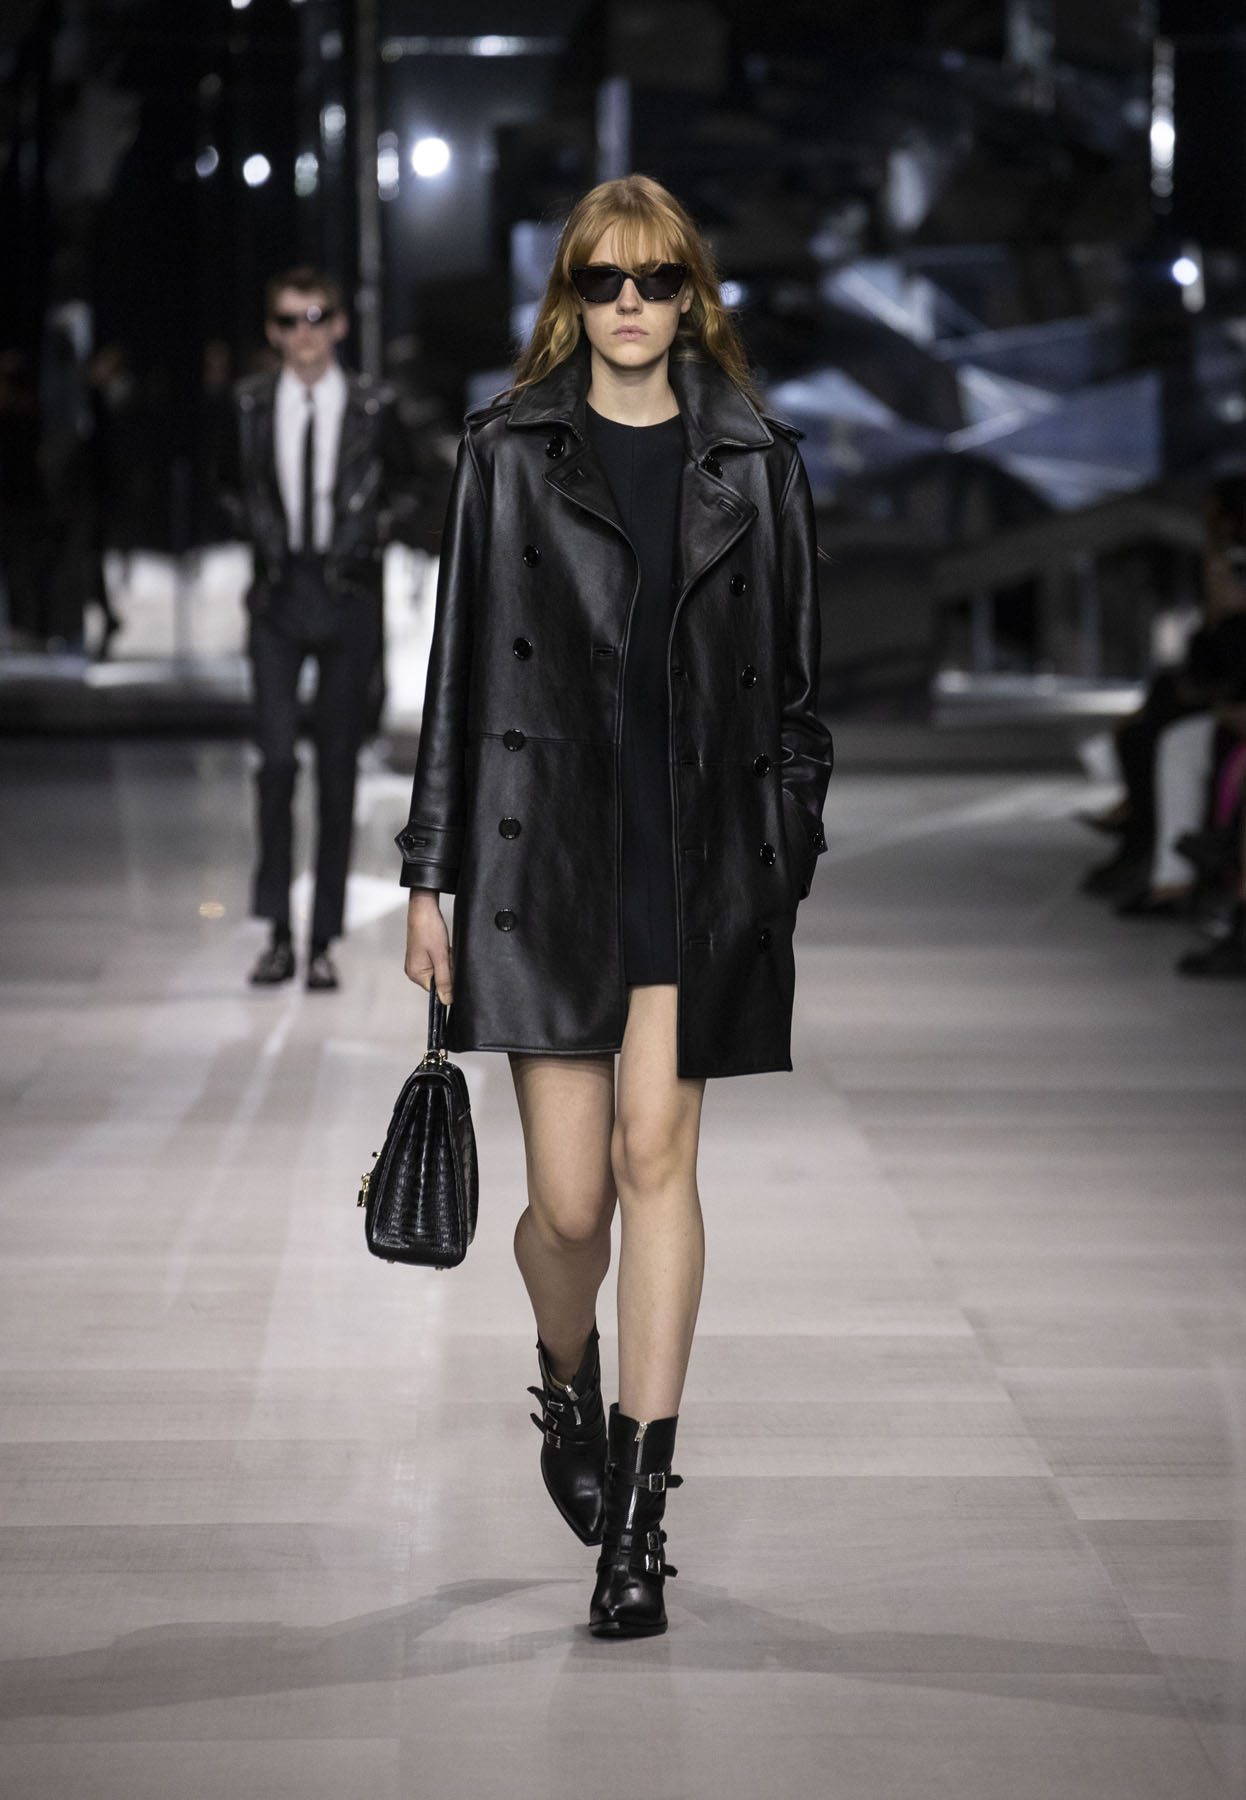 The first Hedi Slimane fashion show for Celine.